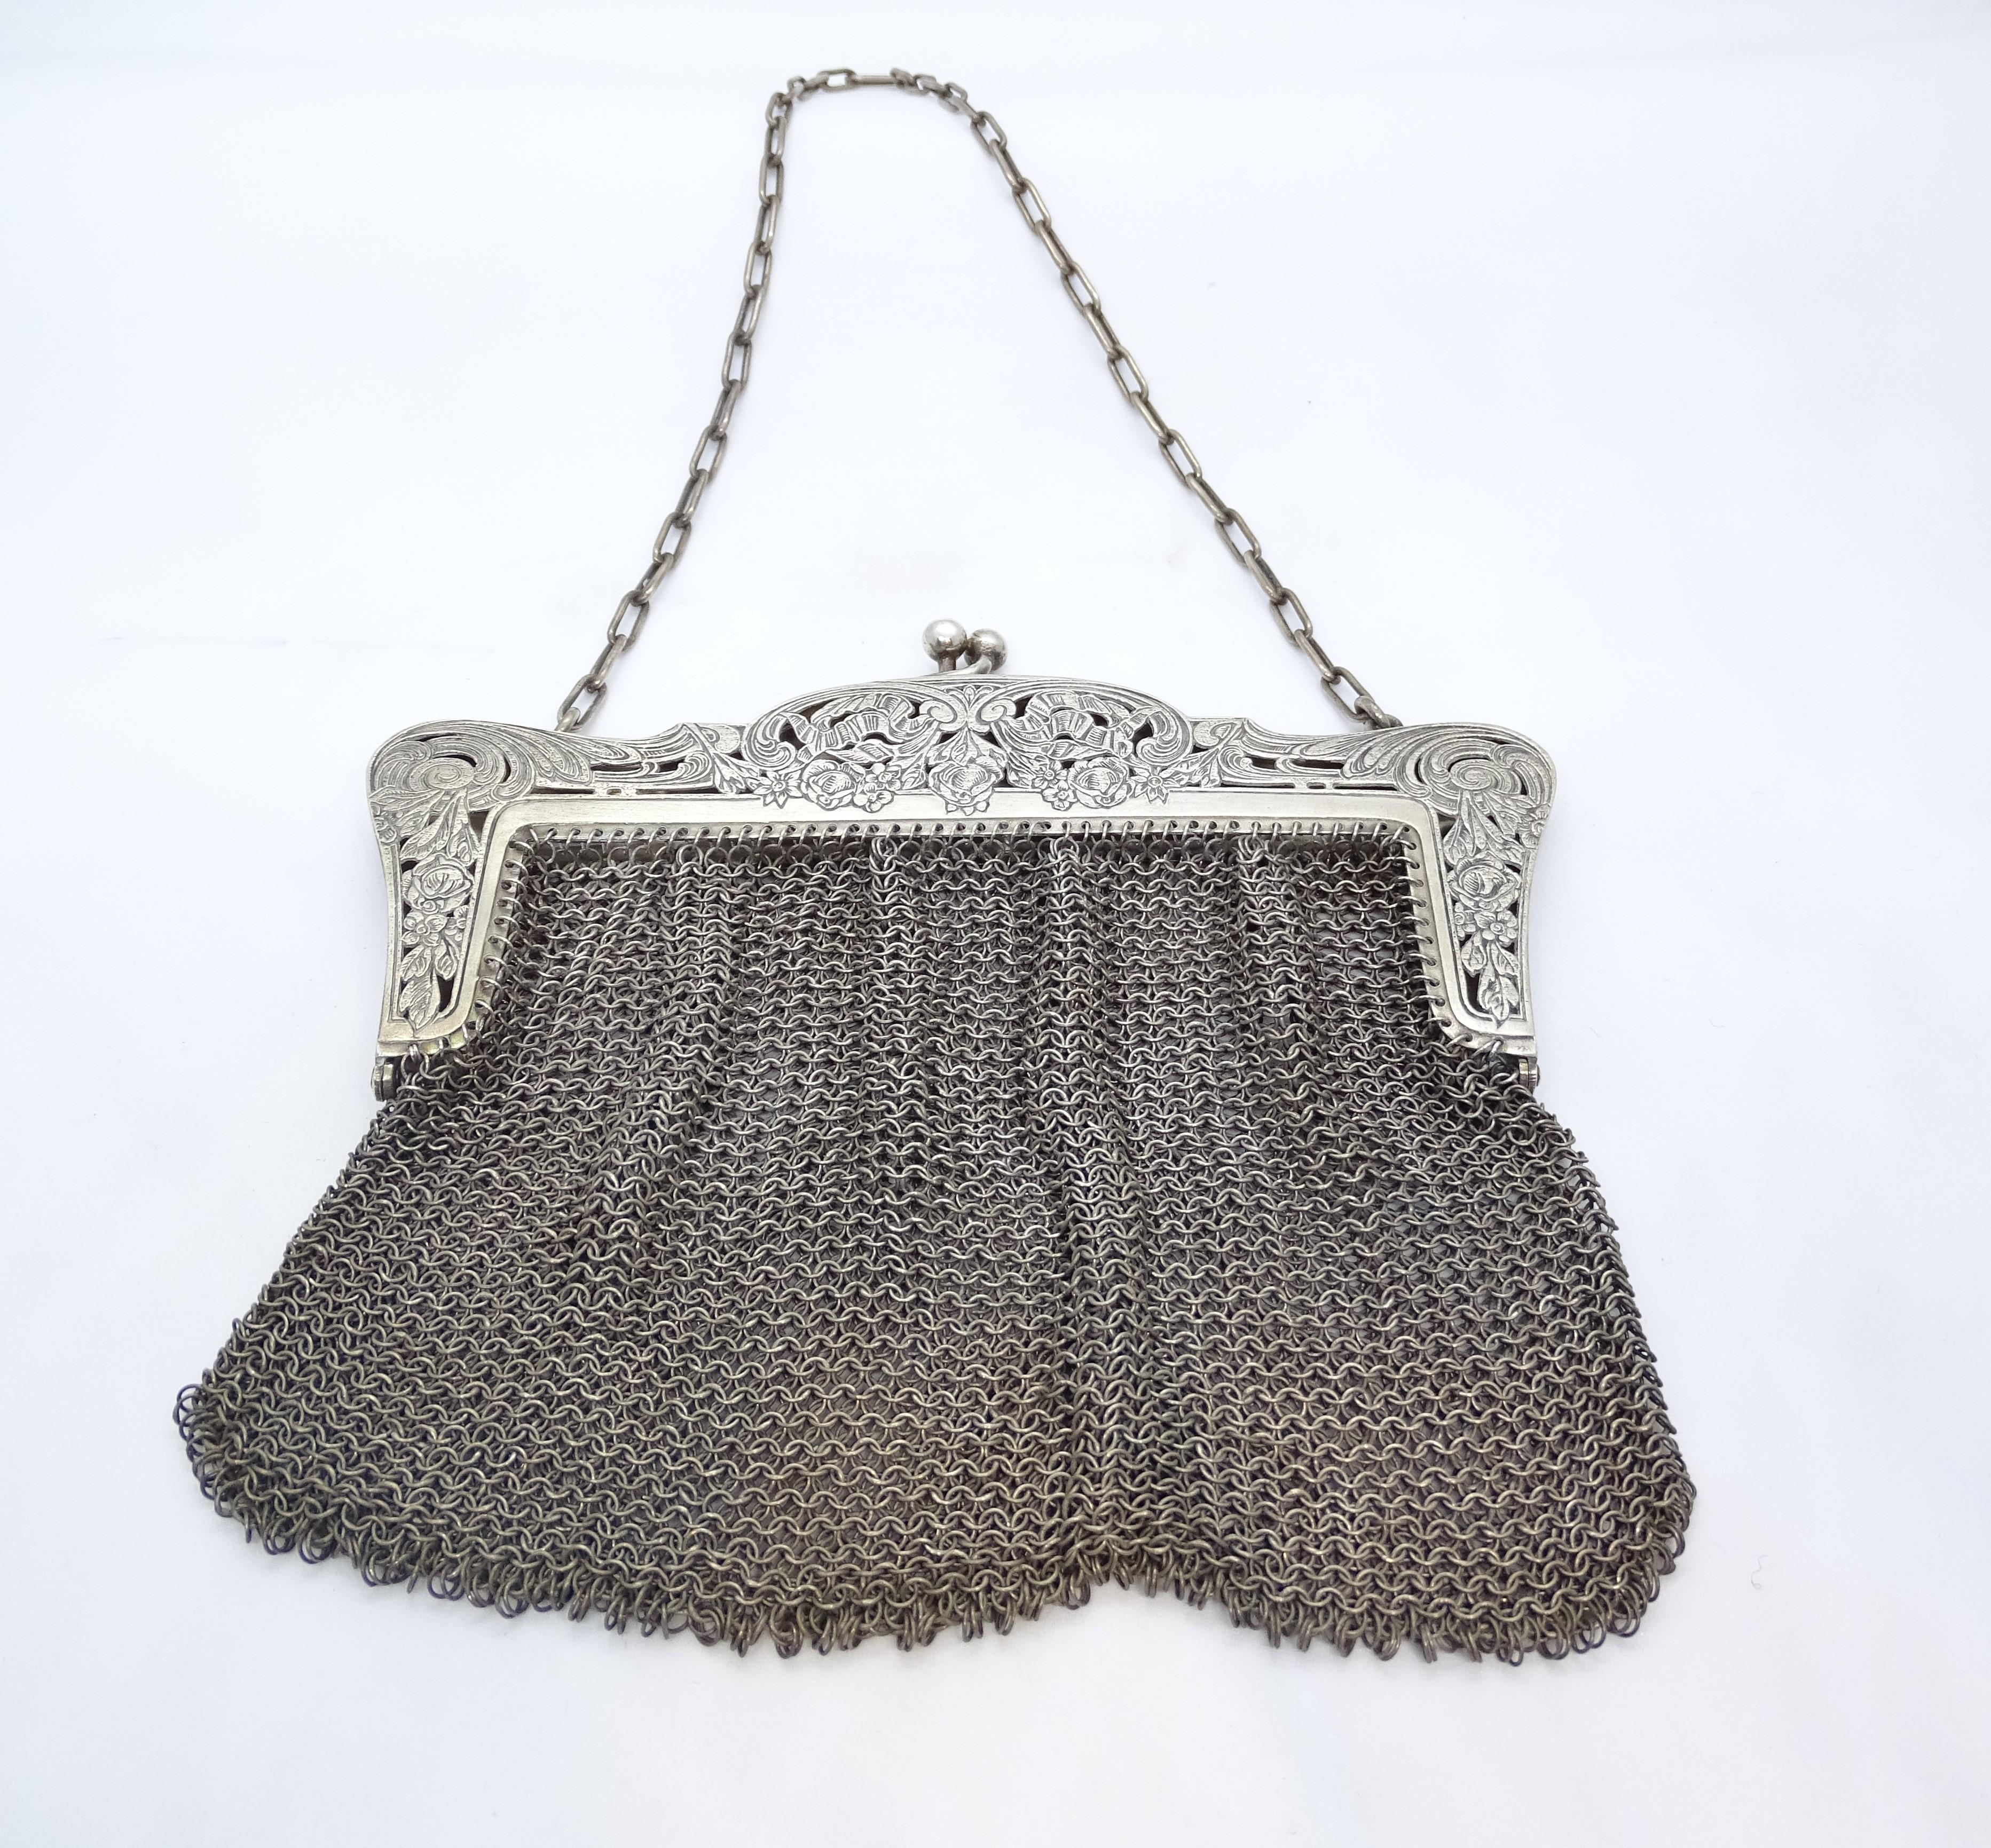 Antique pouch bag, silver plate, late 19th century – England
Silver plate purse or pouch, made at the end of the 19th century in England. The main body is made of mesh, framed at the top with a rigid band, also in silver, decorated on the front with